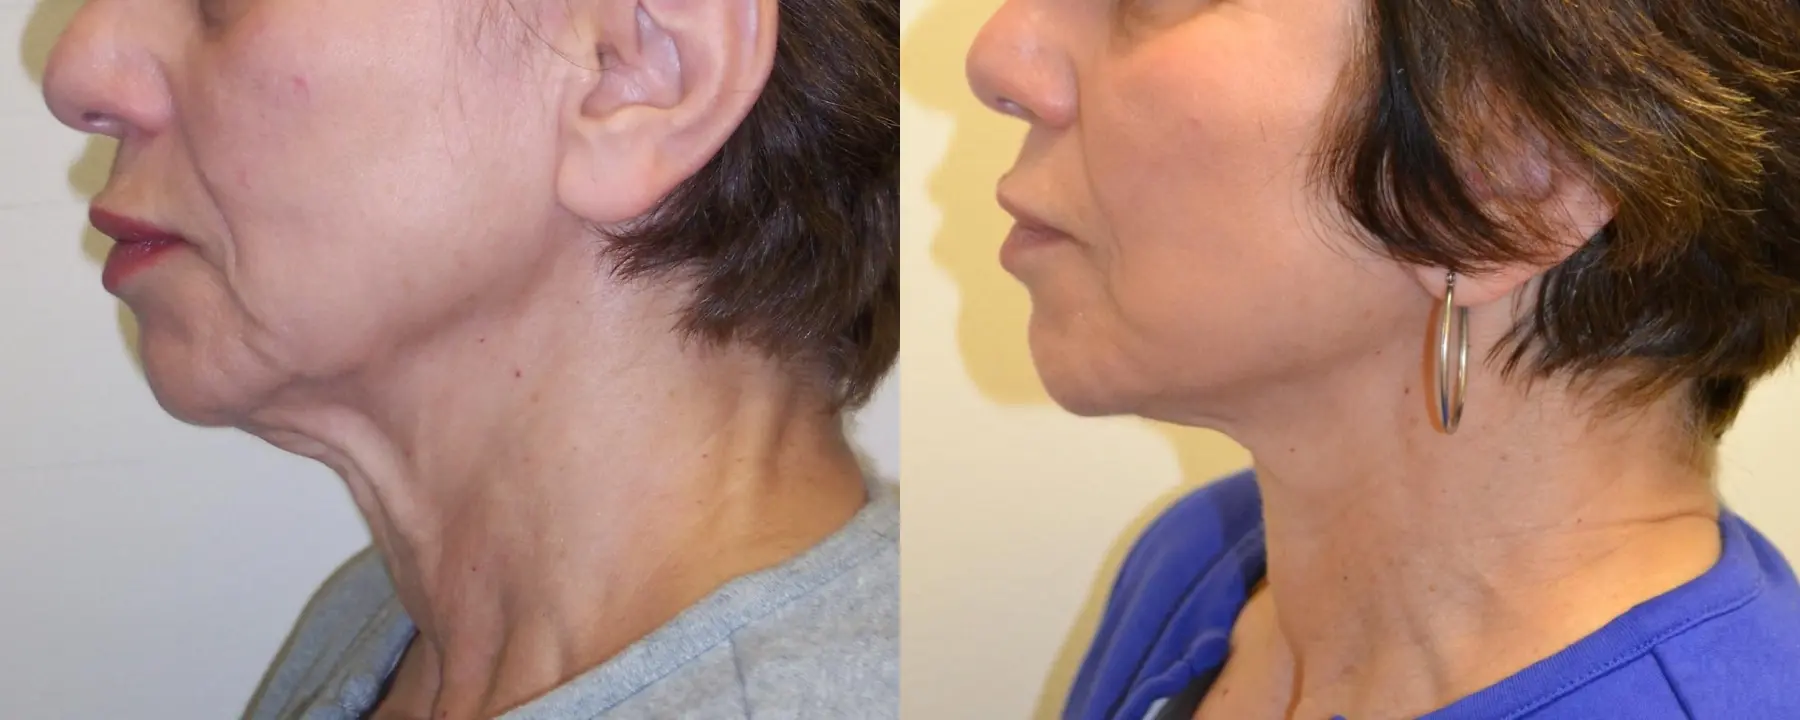 Facelift: Patient 10 - Before and After 3